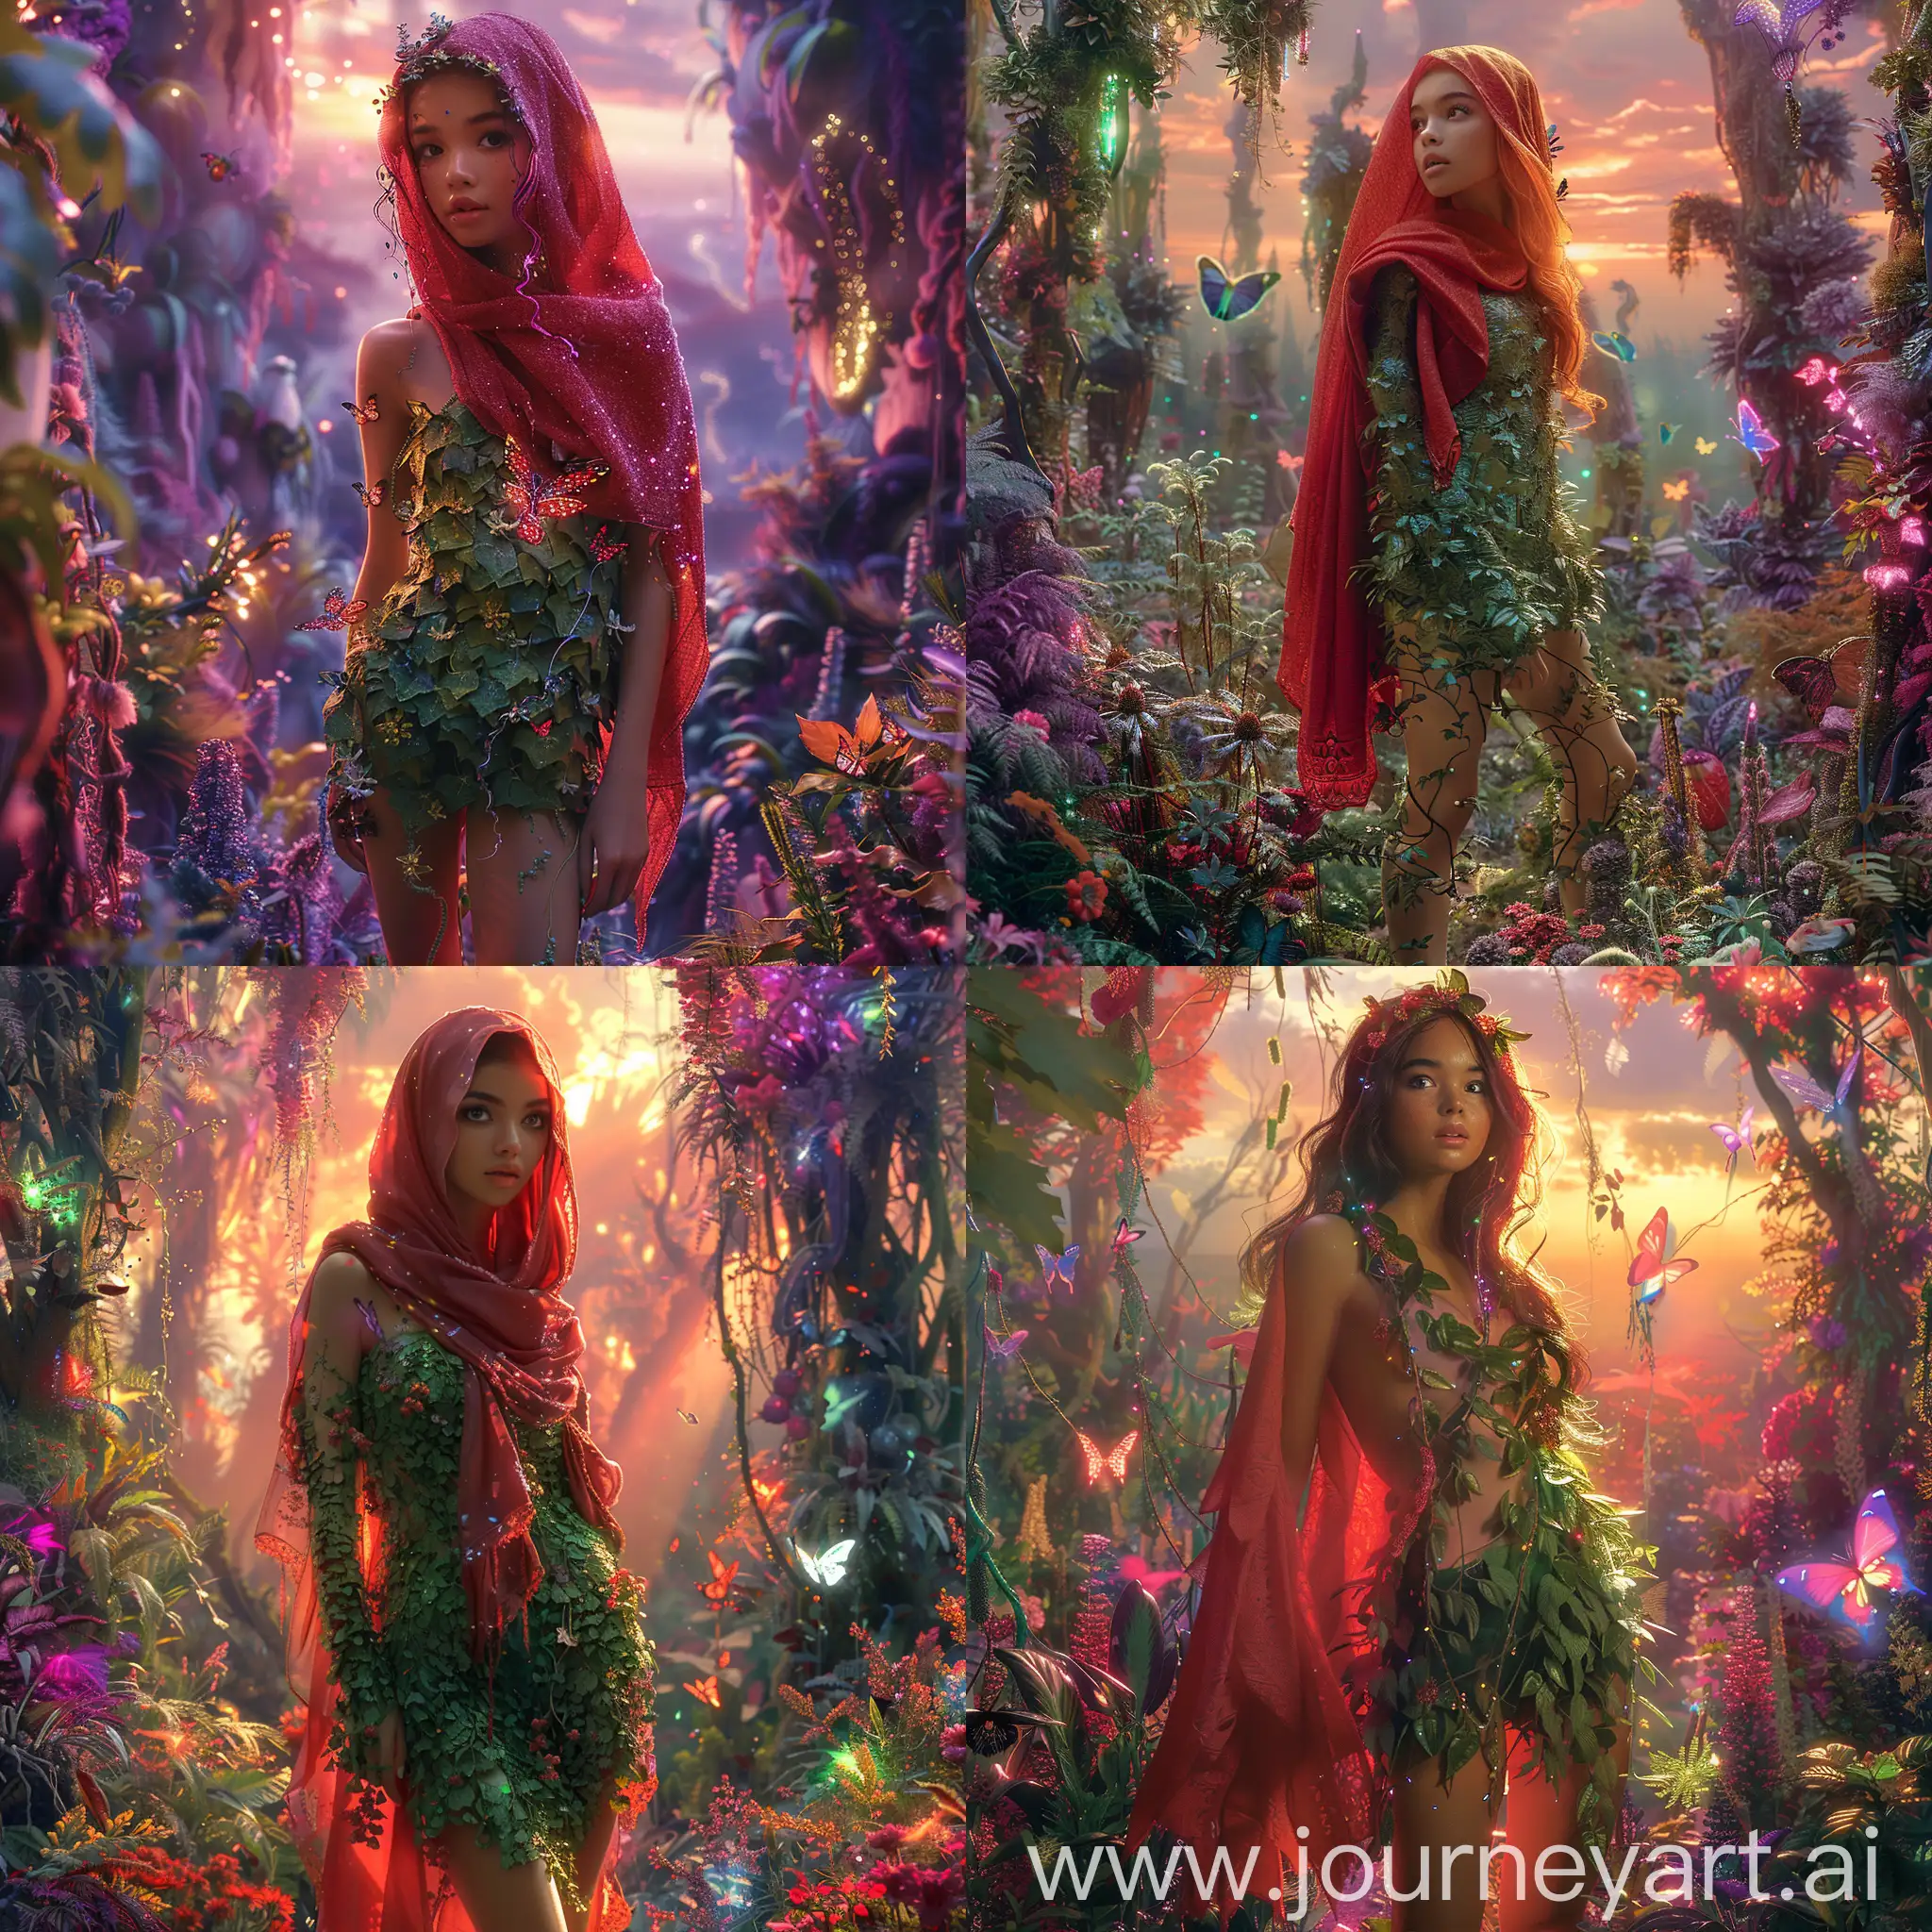 Ethereal-Muslimah-in-Magical-Forest-Red-Shawl-and-Green-Dress